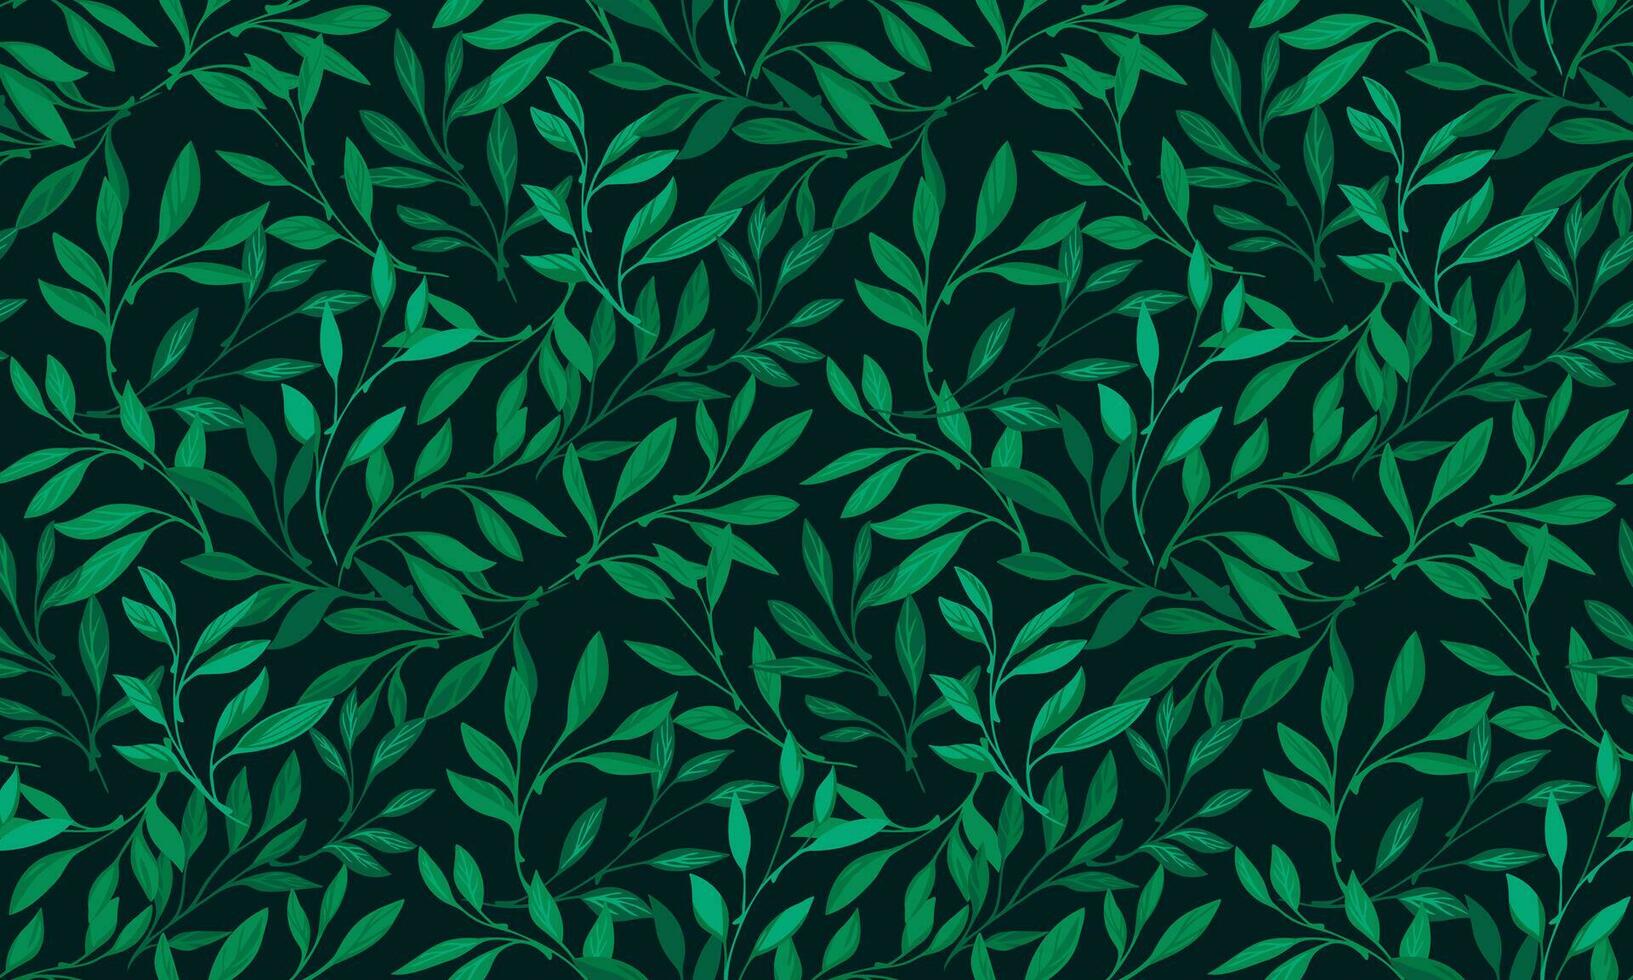 Beautiful, ornate, tiny leaves pattern. Vector hand drawn green branches leaves.  Abstract nature leaf pattern. Template for textile, fashion, print, surface design, paper, cover, fabric